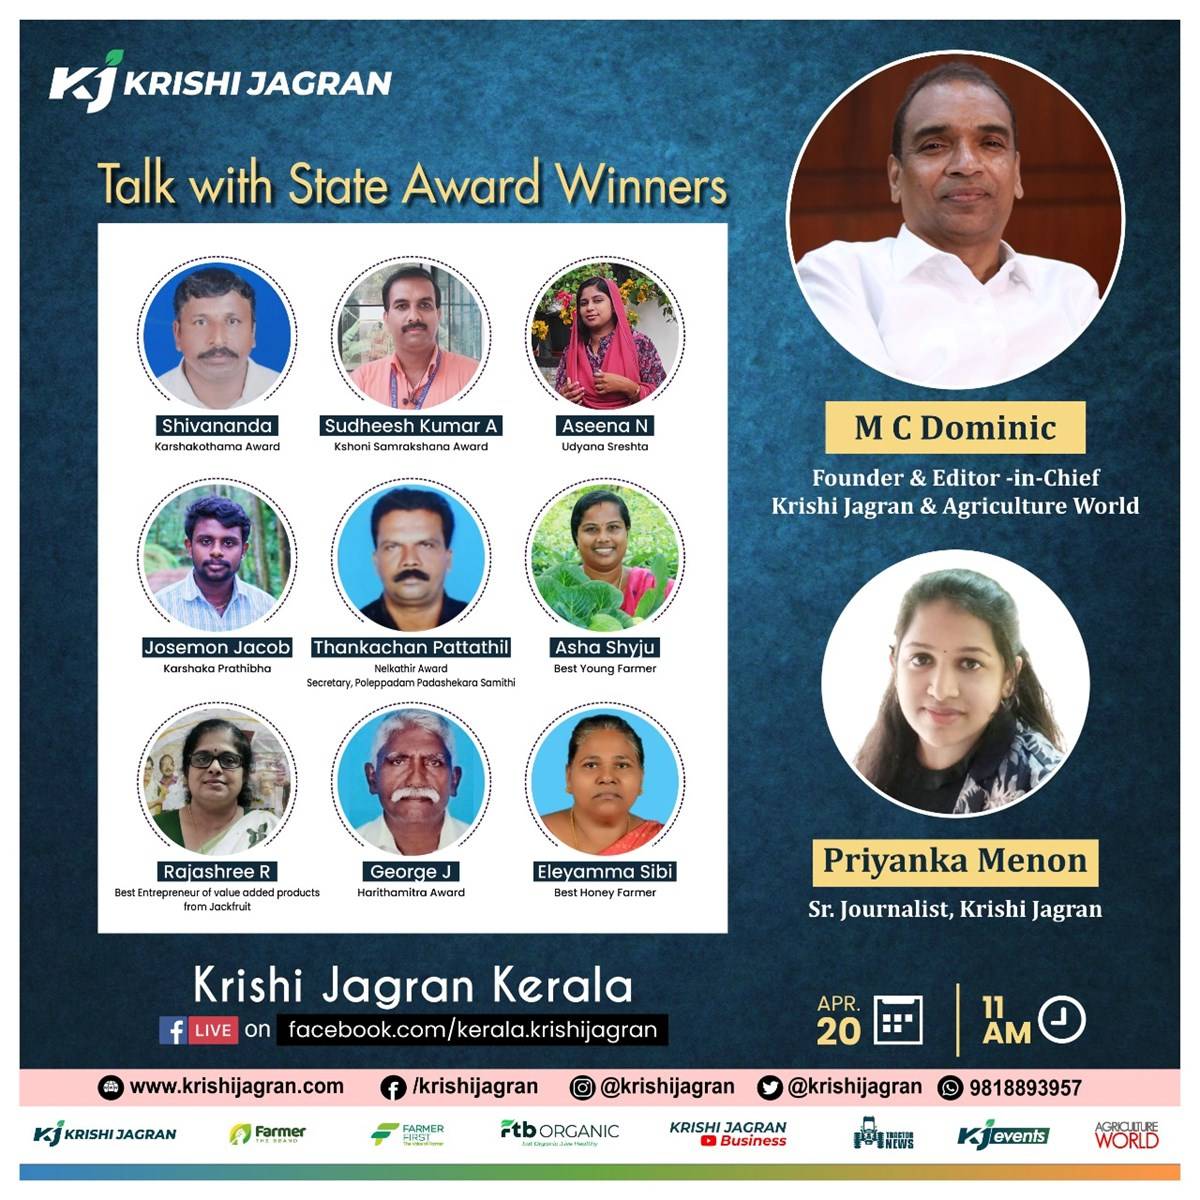 These nine agricultural contributors will share their farming experiences on Krishi Jagran Kerala today at 11:00 am.